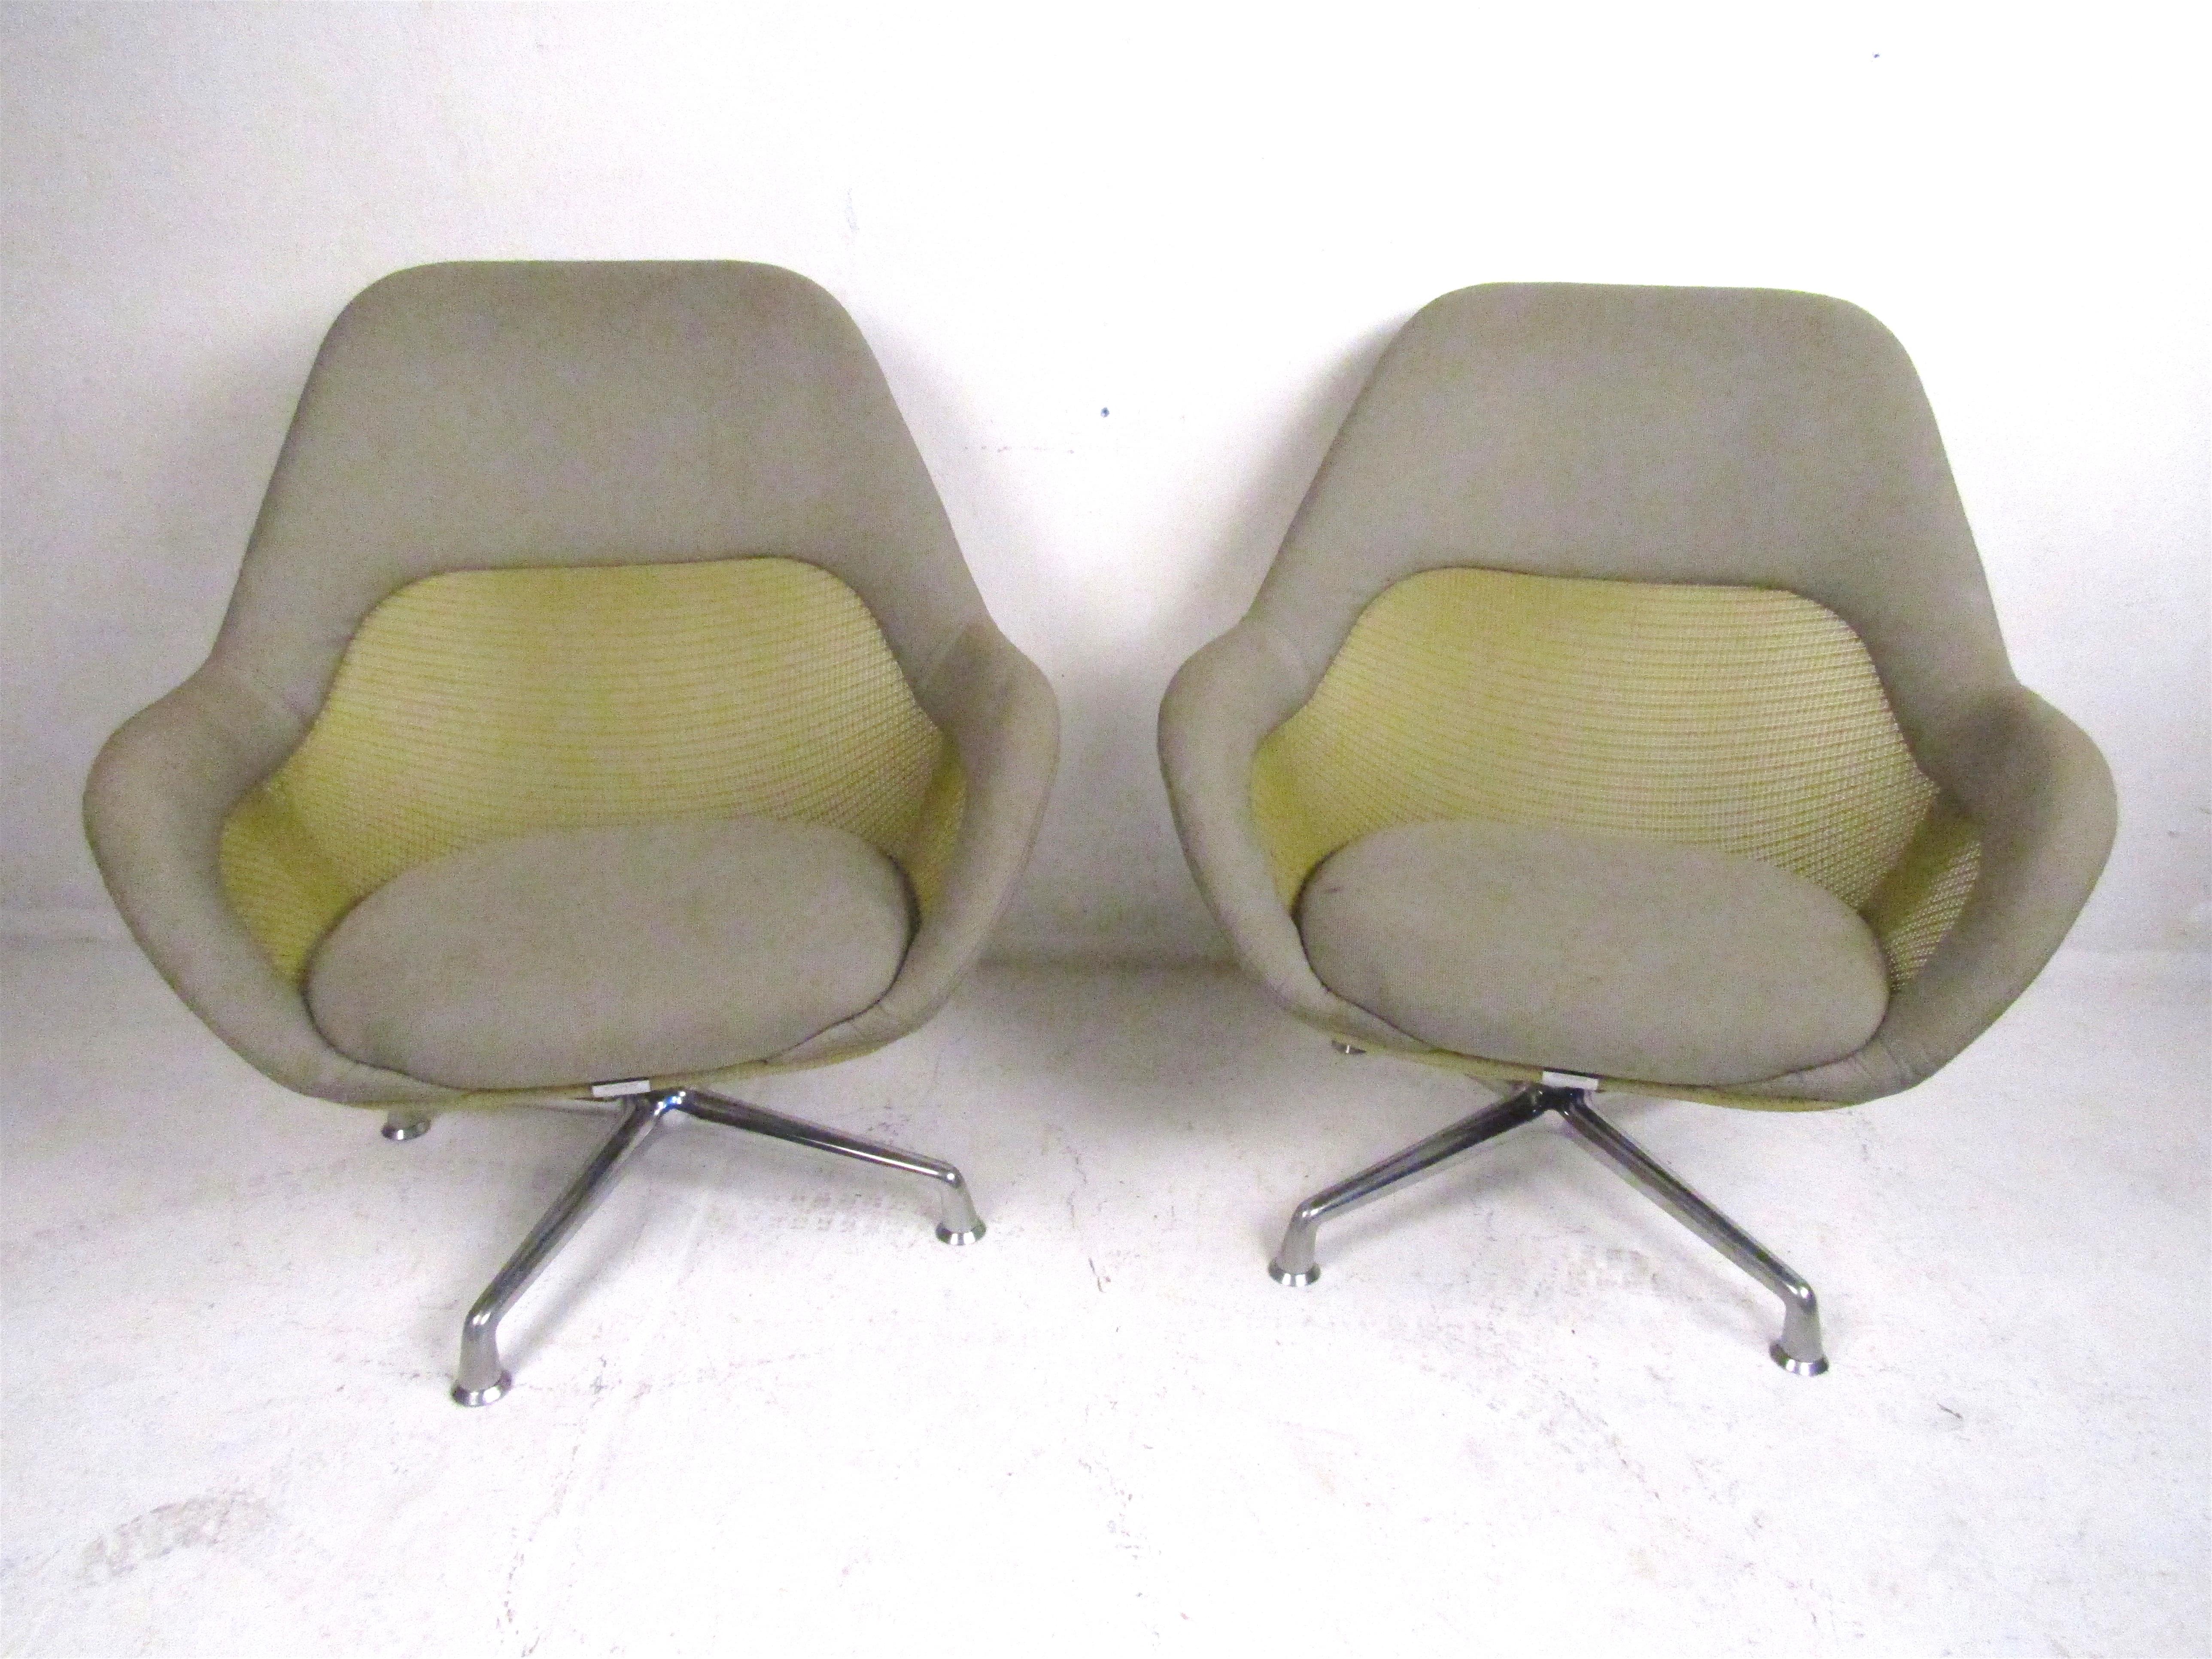 A set of modern Coalesse lounge/office chairs. A beautiful color combination of grey fabric, green mesh with solid metal legs. These chairs offer a very comfortable seating position as well as the ability to swivel making them a great addition to